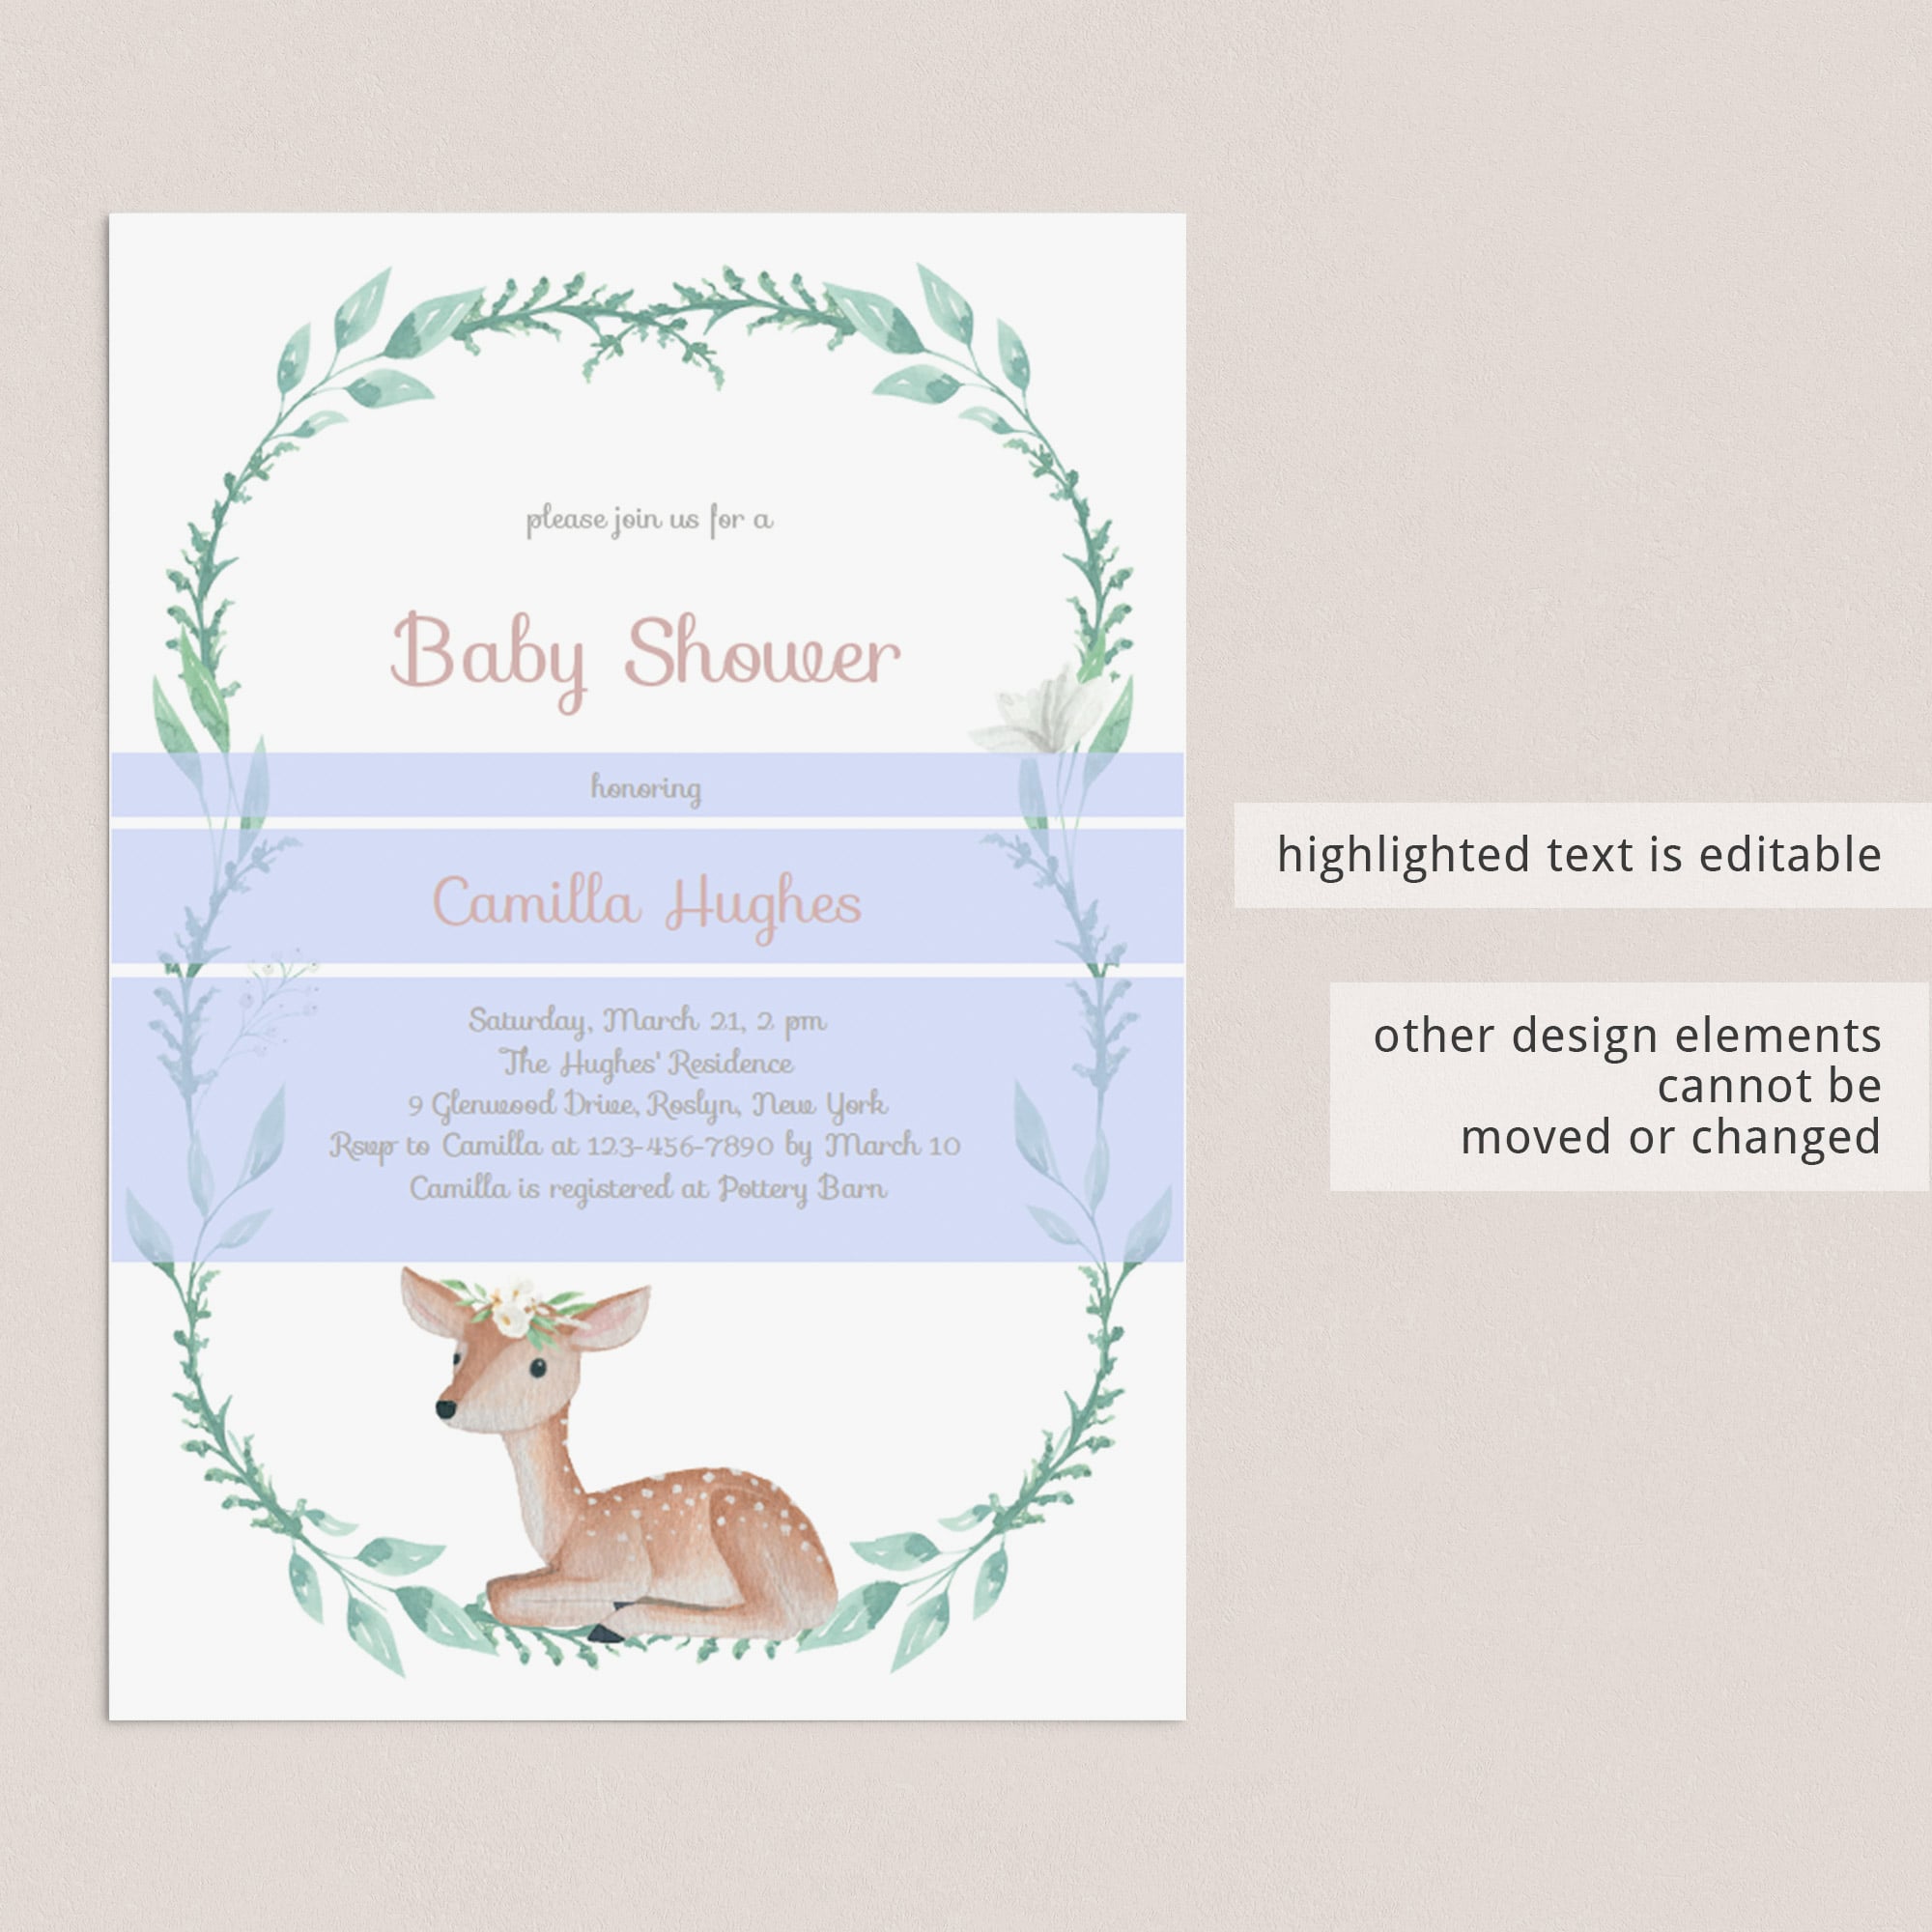 Editable boho chic invitation for baby shower party by LittleSizzle